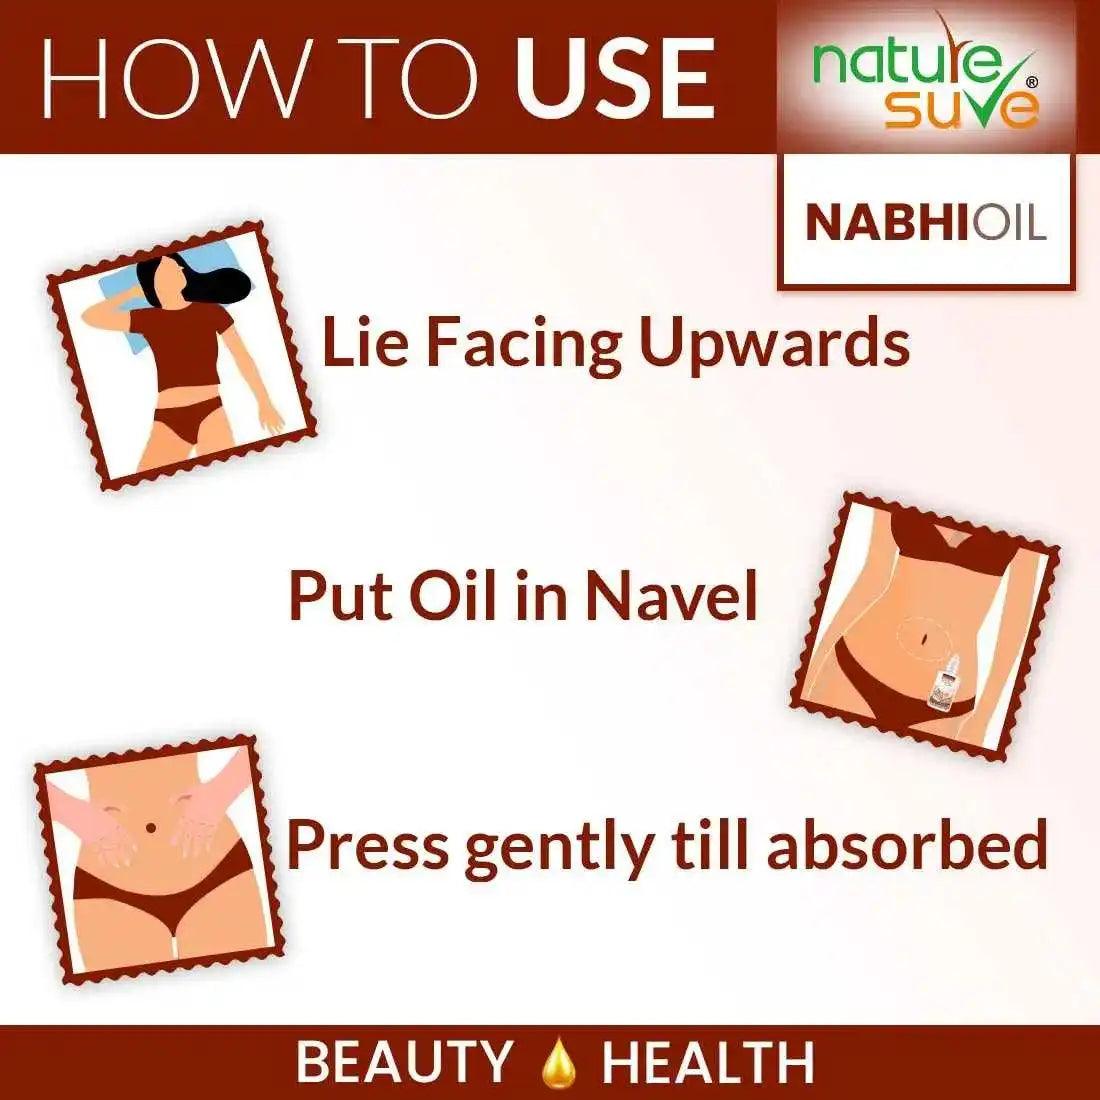 Nature Sure Belly Button Nabhi Oil for Health and Beauty - Directions for Use - everteen-neud.com